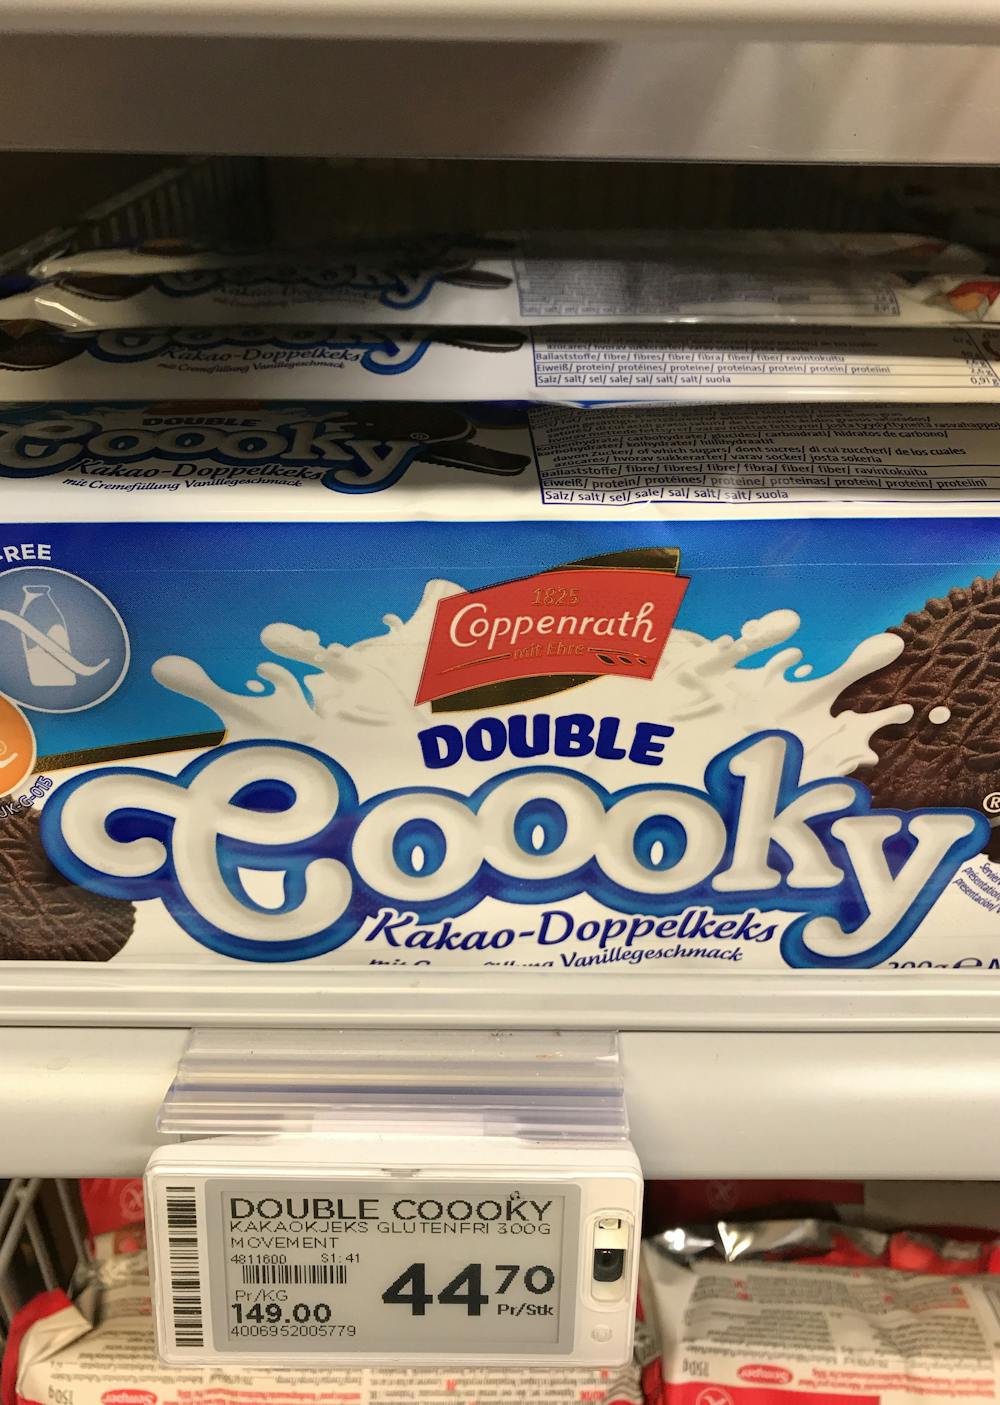 Double coooky, Coppenrath